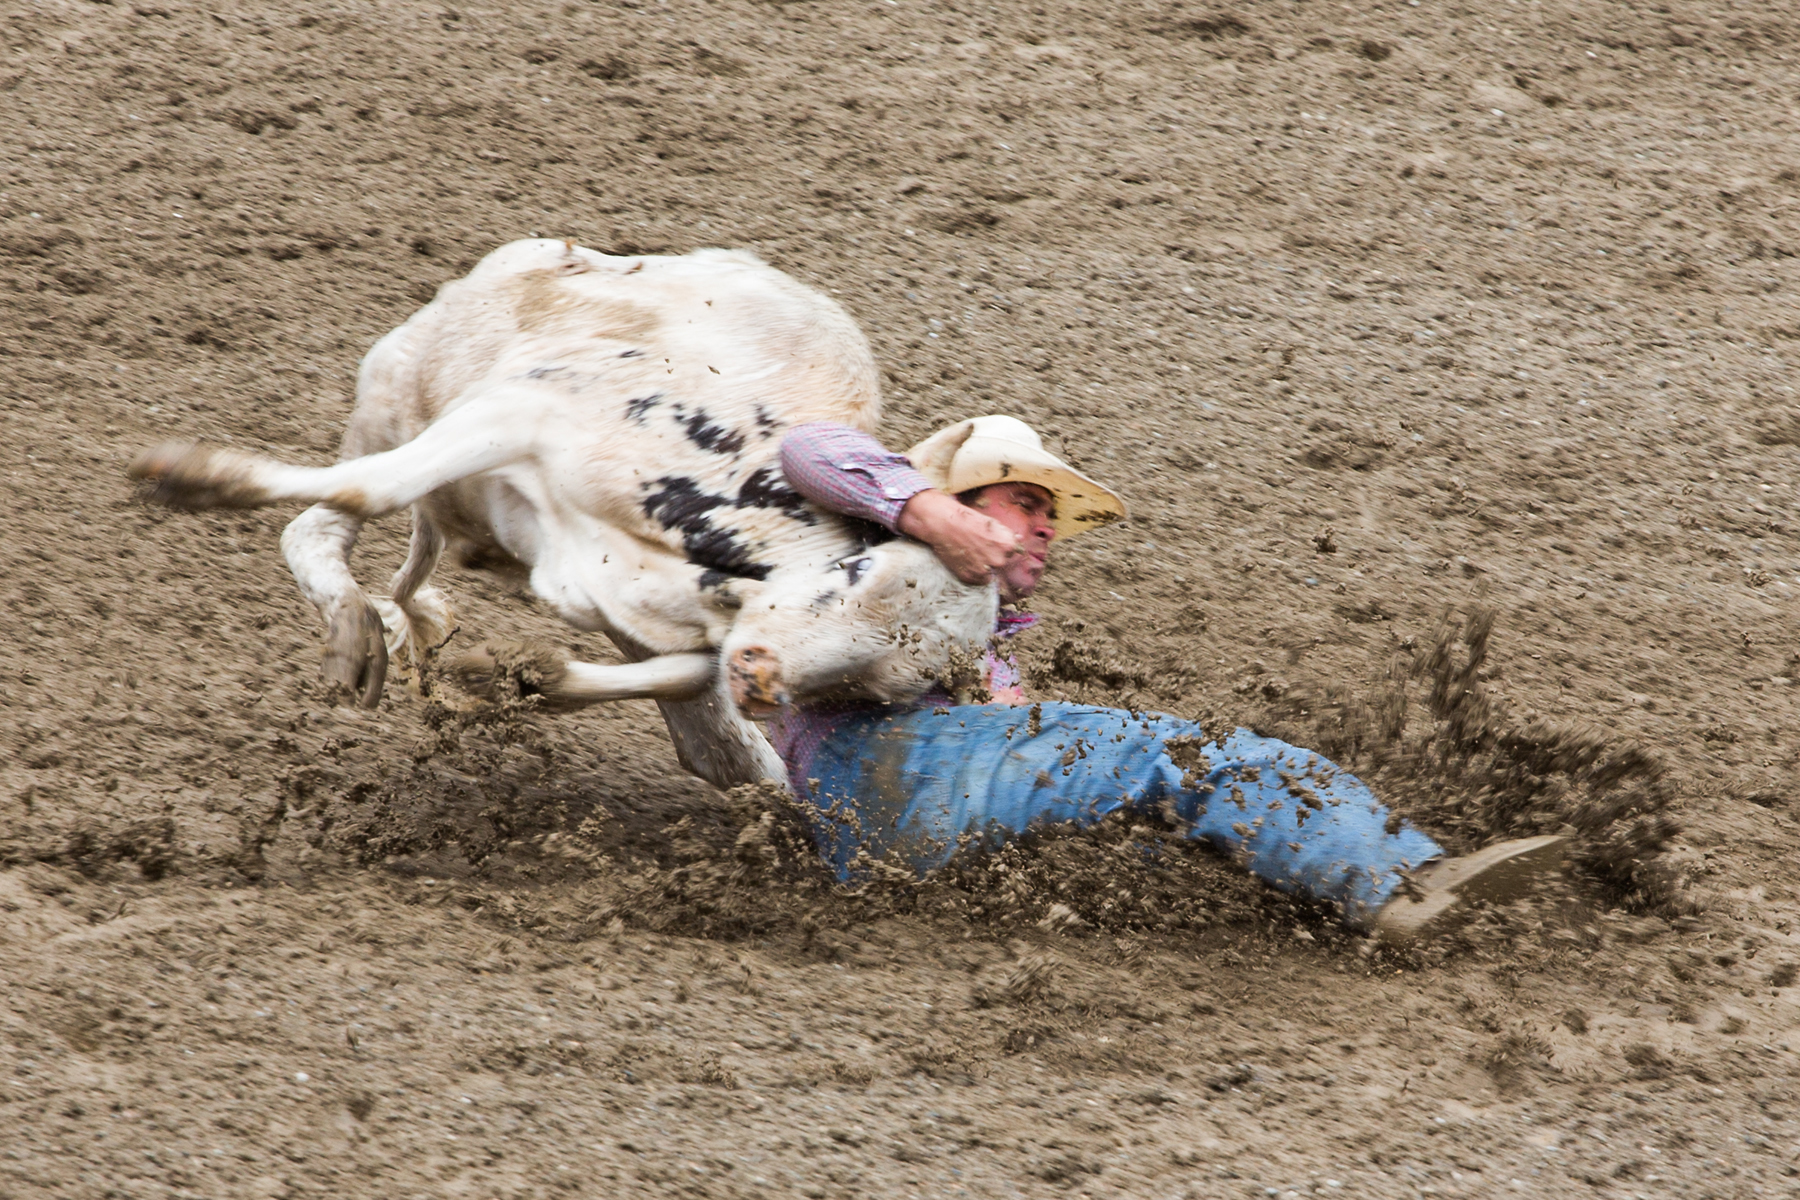 Steer wrestling at Home of Champions Rodeo, Red Lodge, MT.  Click for next photo.